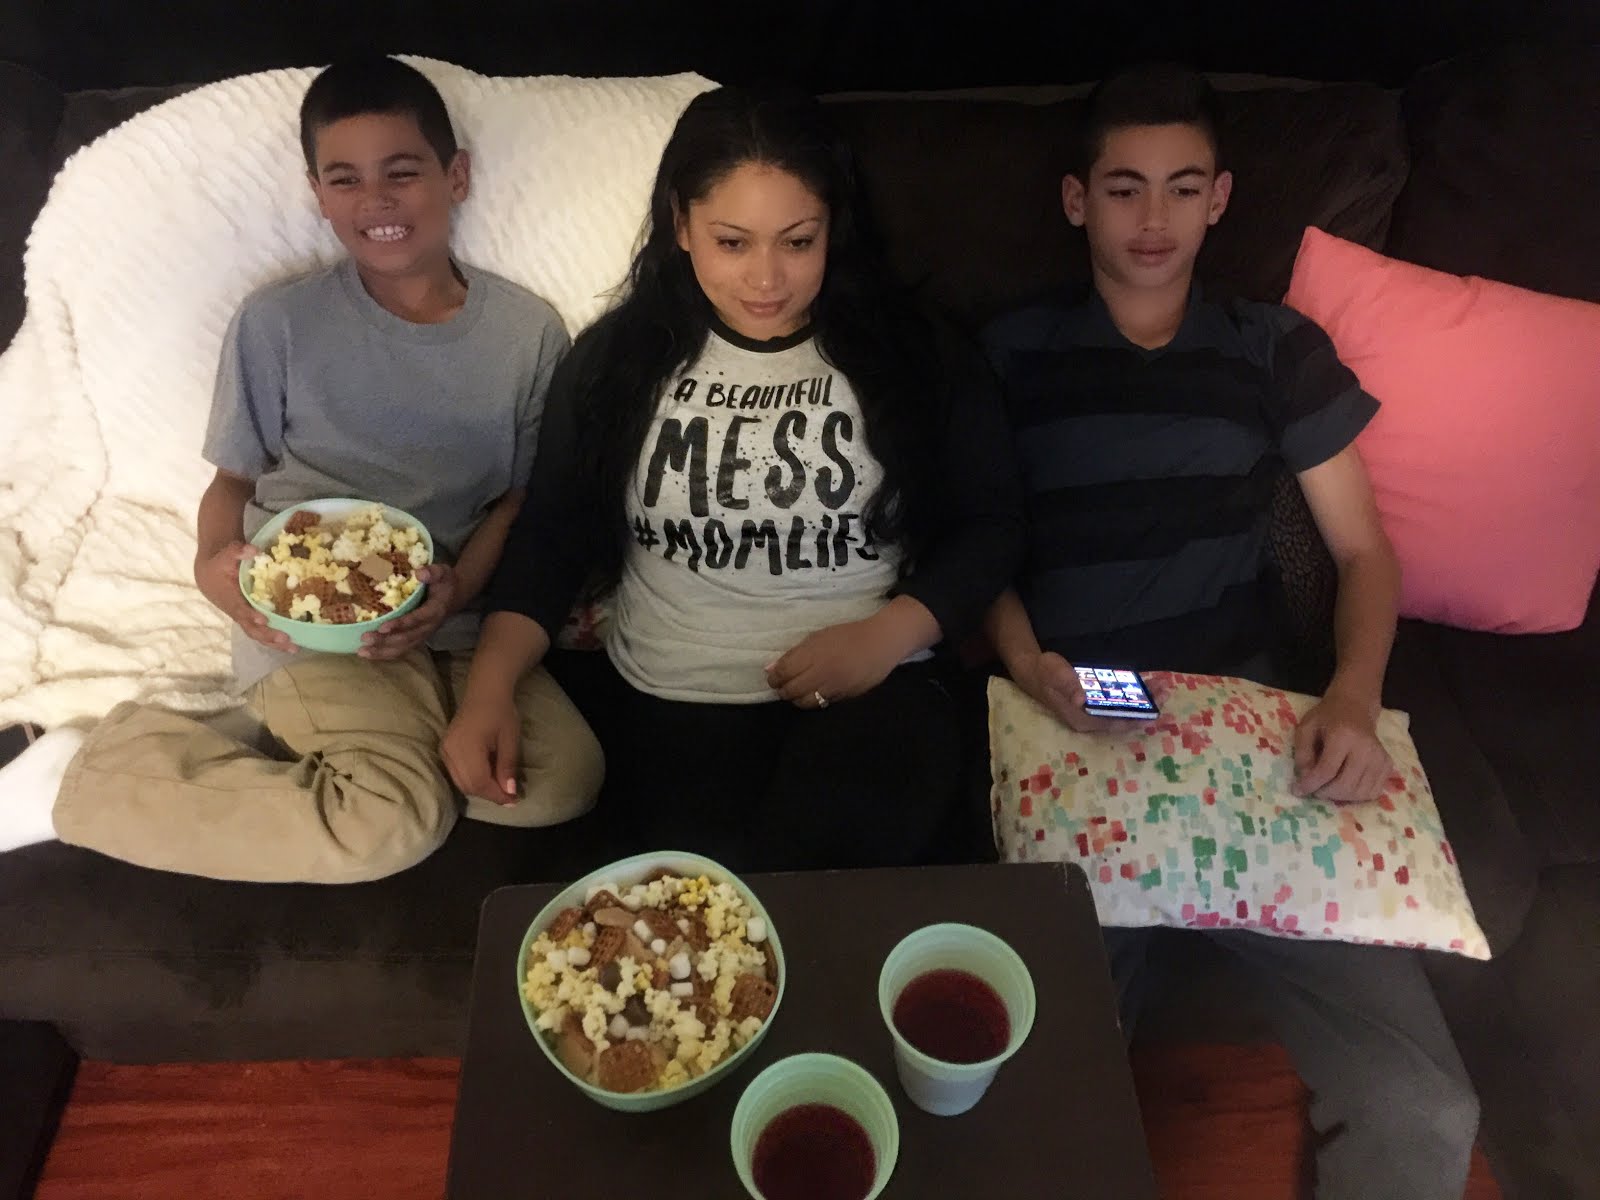 How to have a family campout indoors to watch movies on VUDU. Max Your Tax Cash with Walmart Family Mobile Plus. #YourTaxCash #ad